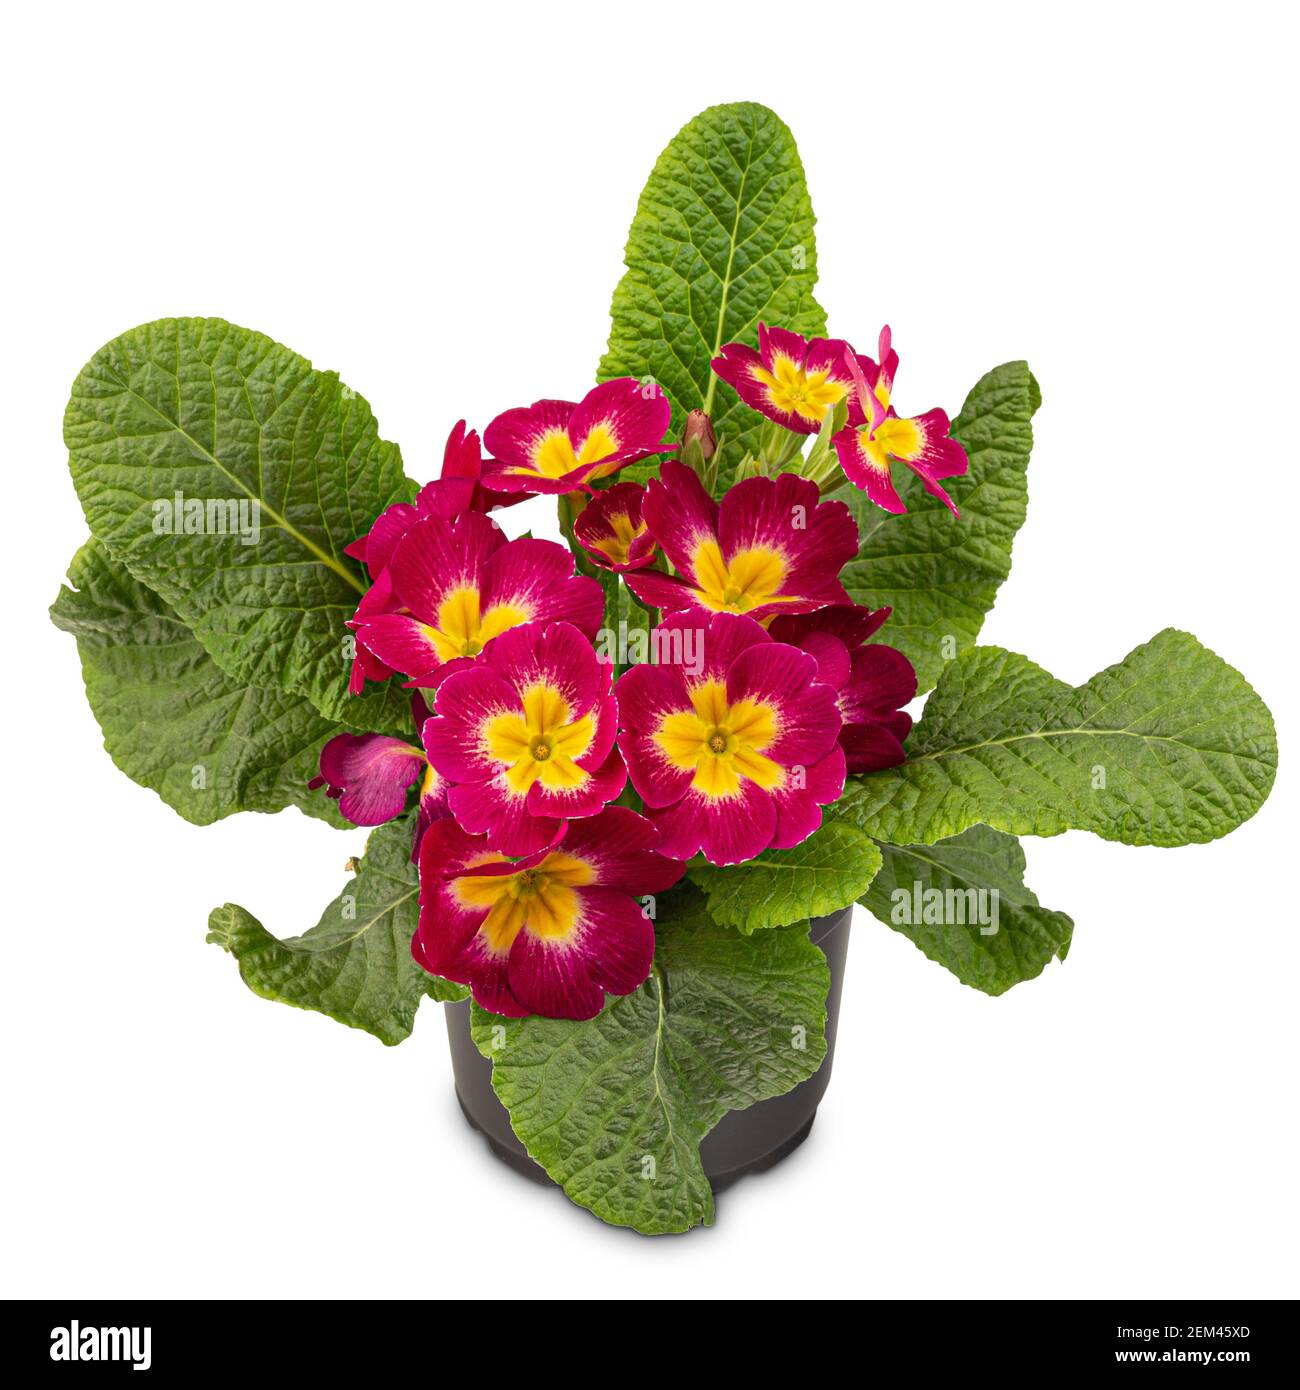 Red primrose with yellow centres Stock Photo